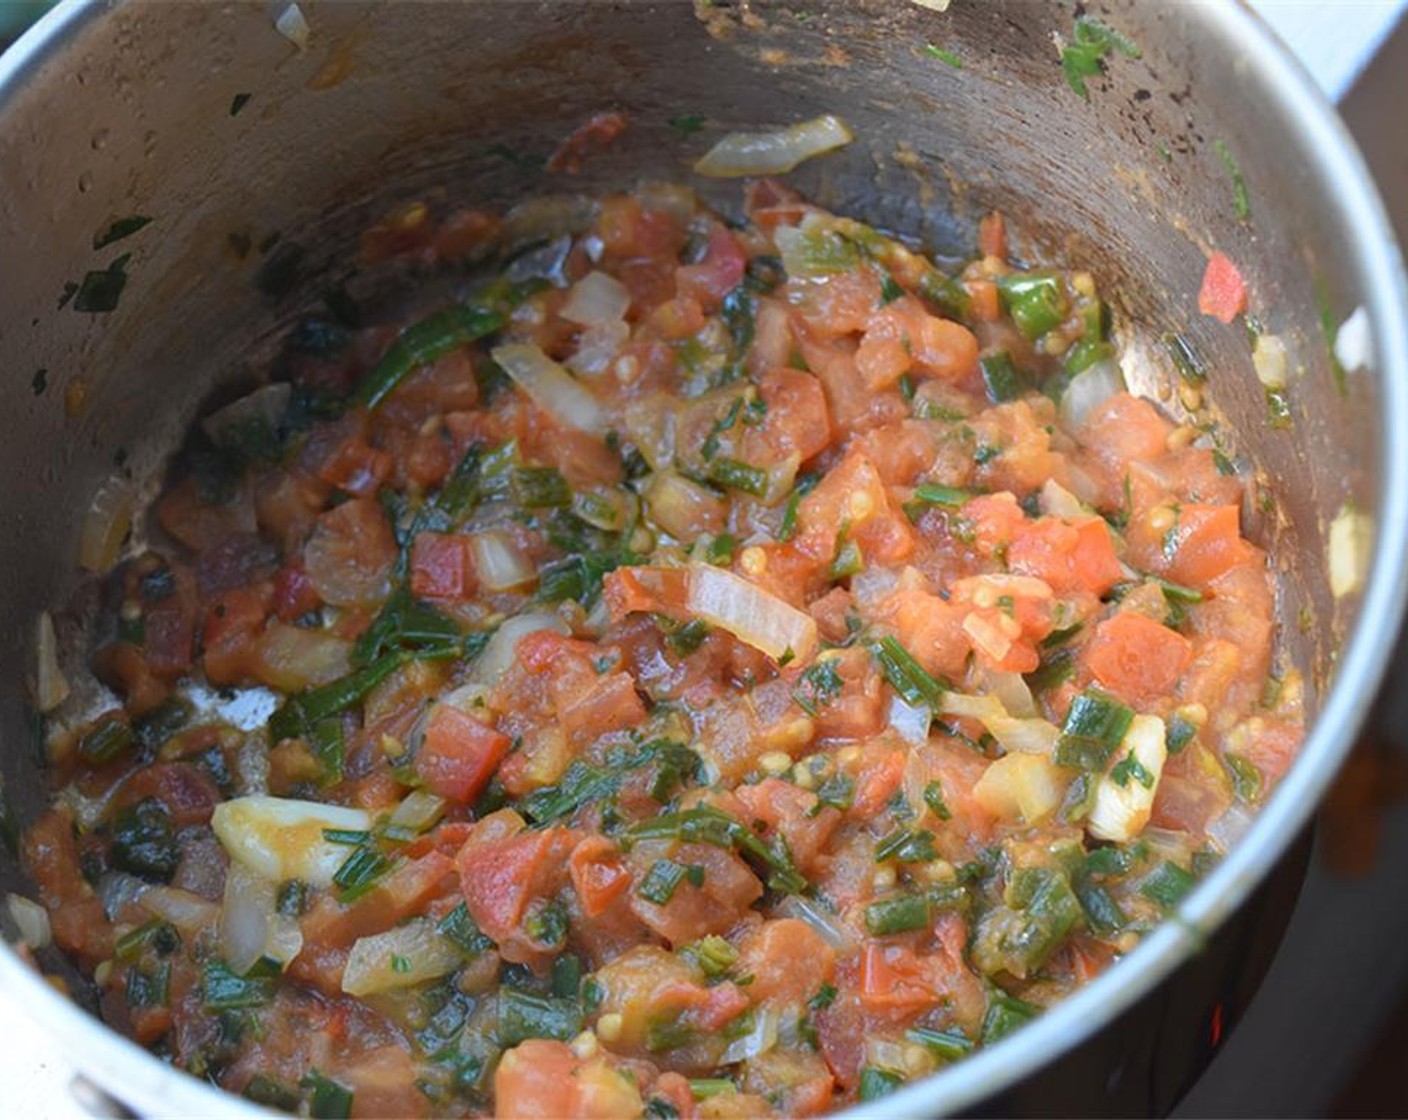 step 3 While beans are cooking, make the guiso. Heat Vegetable Oil (2 Tbsp) in a large skillet. Add Tomatoes (2 cups), Scallion (1), Onion (1 Tbsp), Garlic (2 cloves), Fresh Cilantro (1/2 bunch), and Ground Cumin (1/4 tsp). Cook for 10-15 minutes.